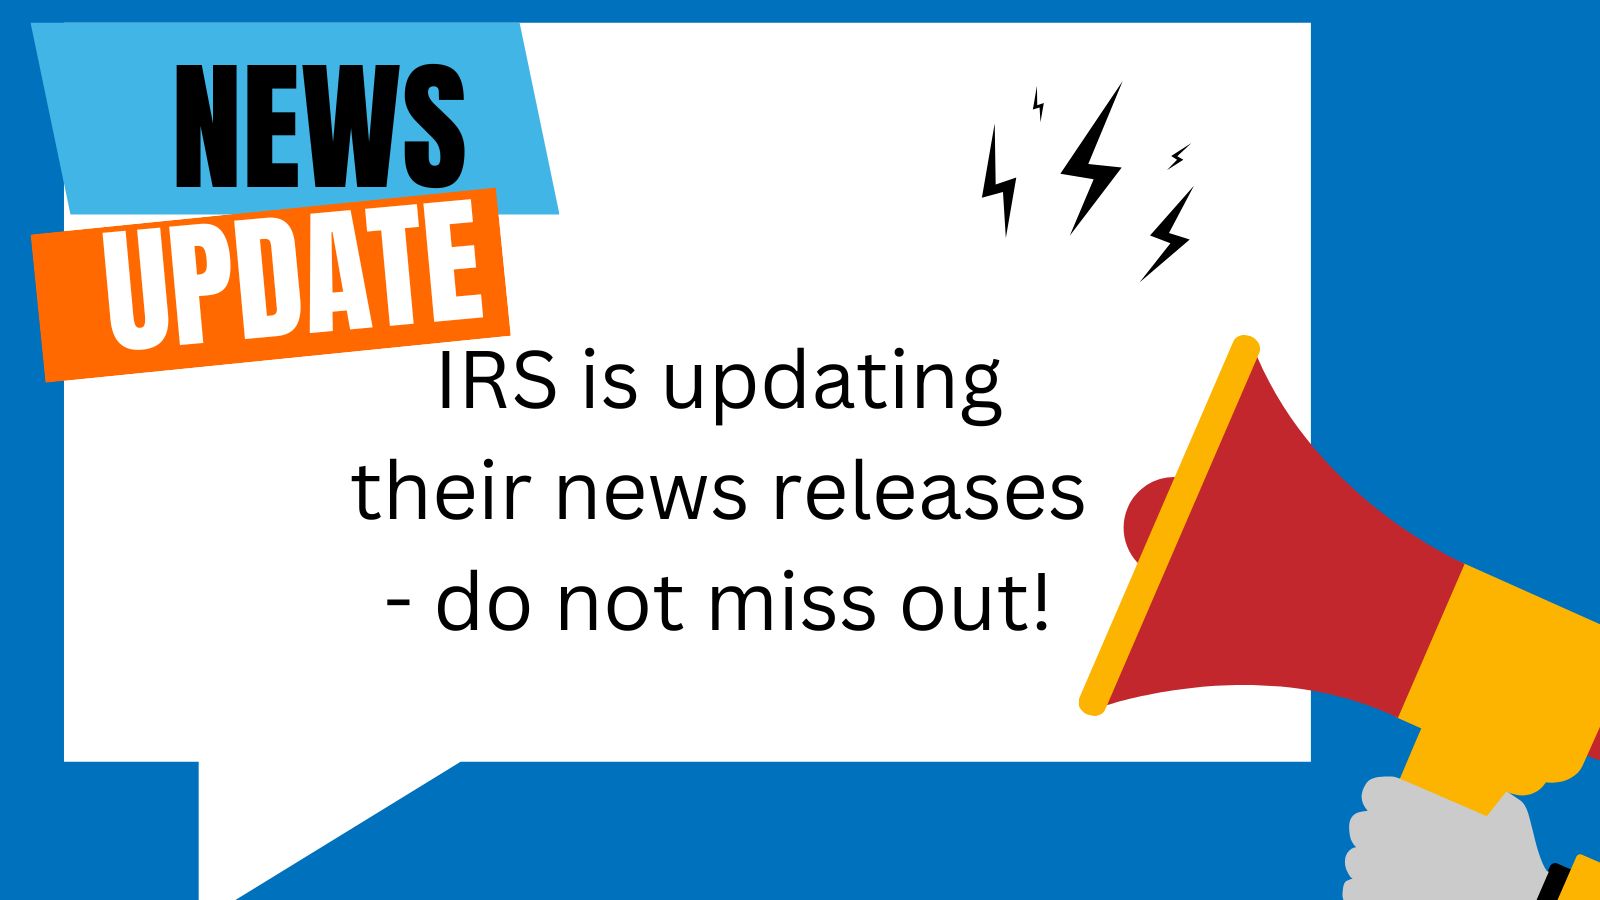 IRS News for You